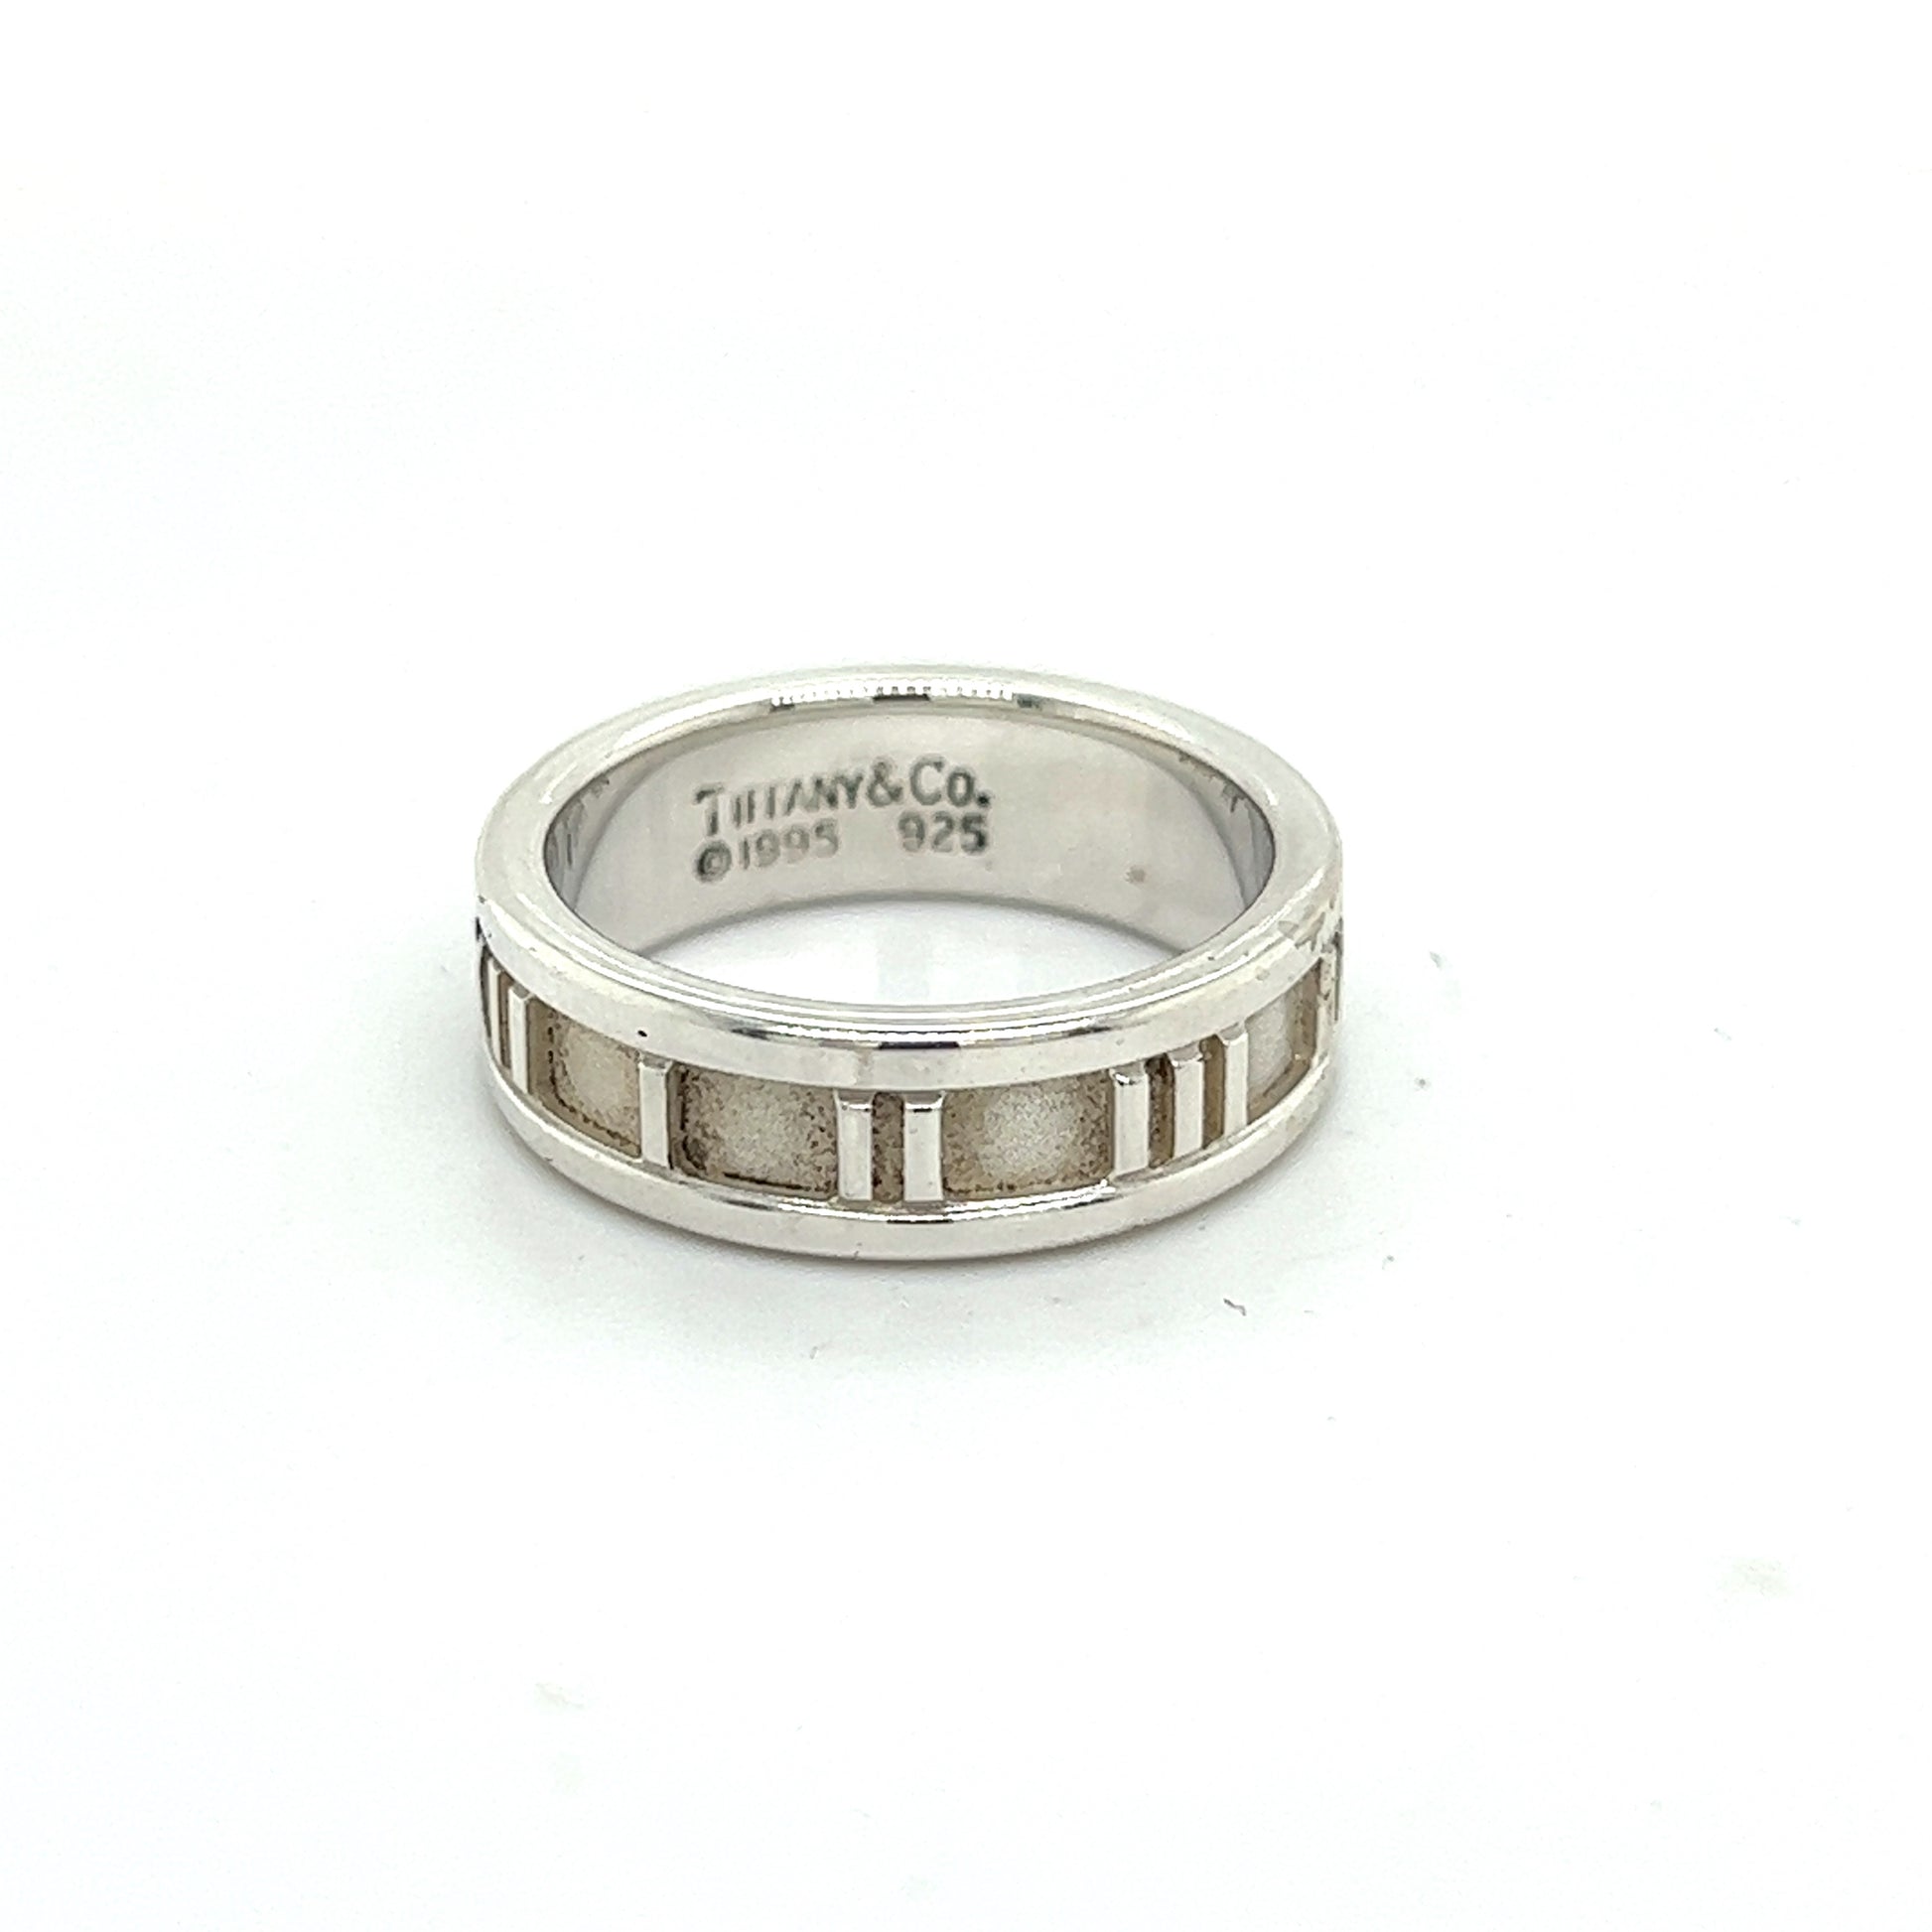 Tiffany & Co Authentic Estate Atlas Ring Size 6.5 Silver 6 mm TIF379